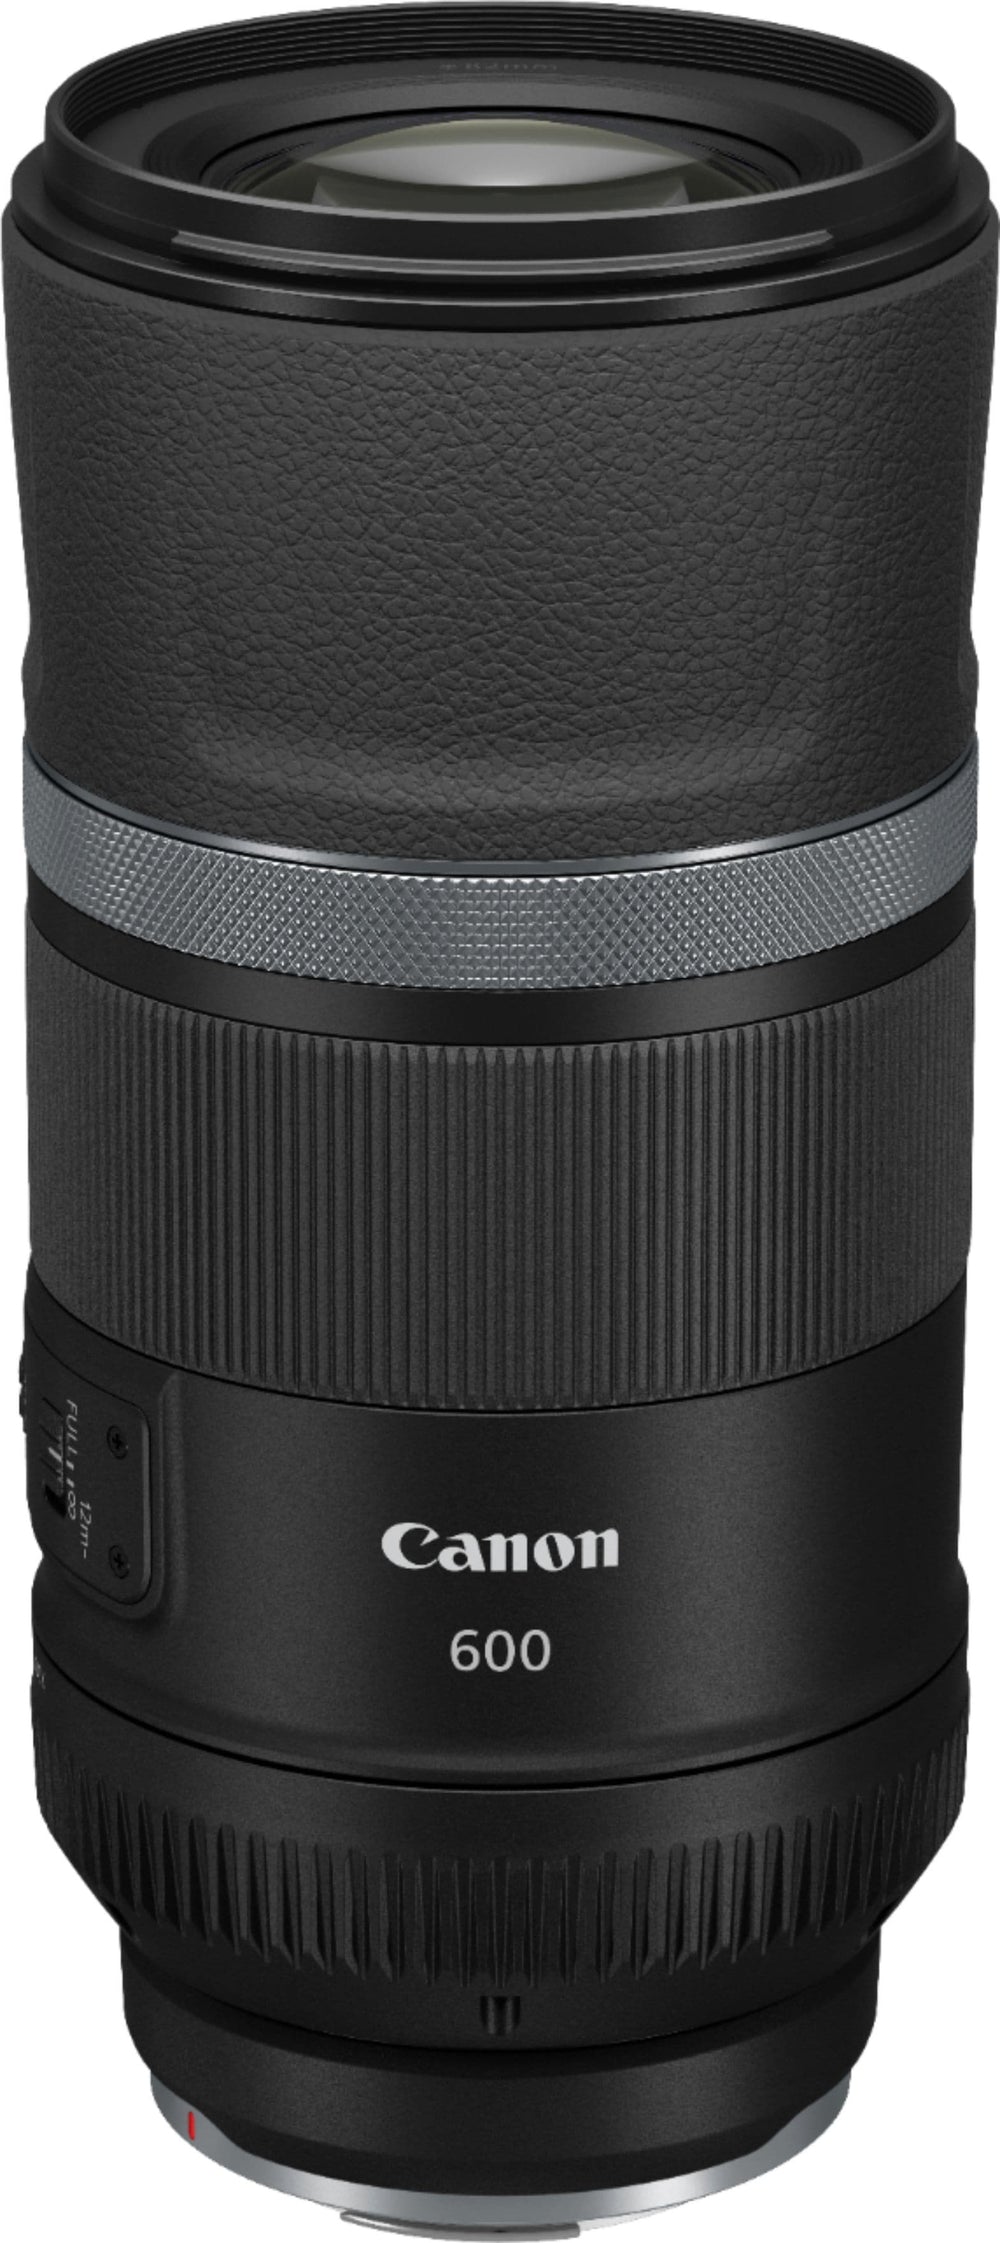 Canon - RF 600mm f/11 IS STM Telephoto Lens for EOS R Cameras - Black_1